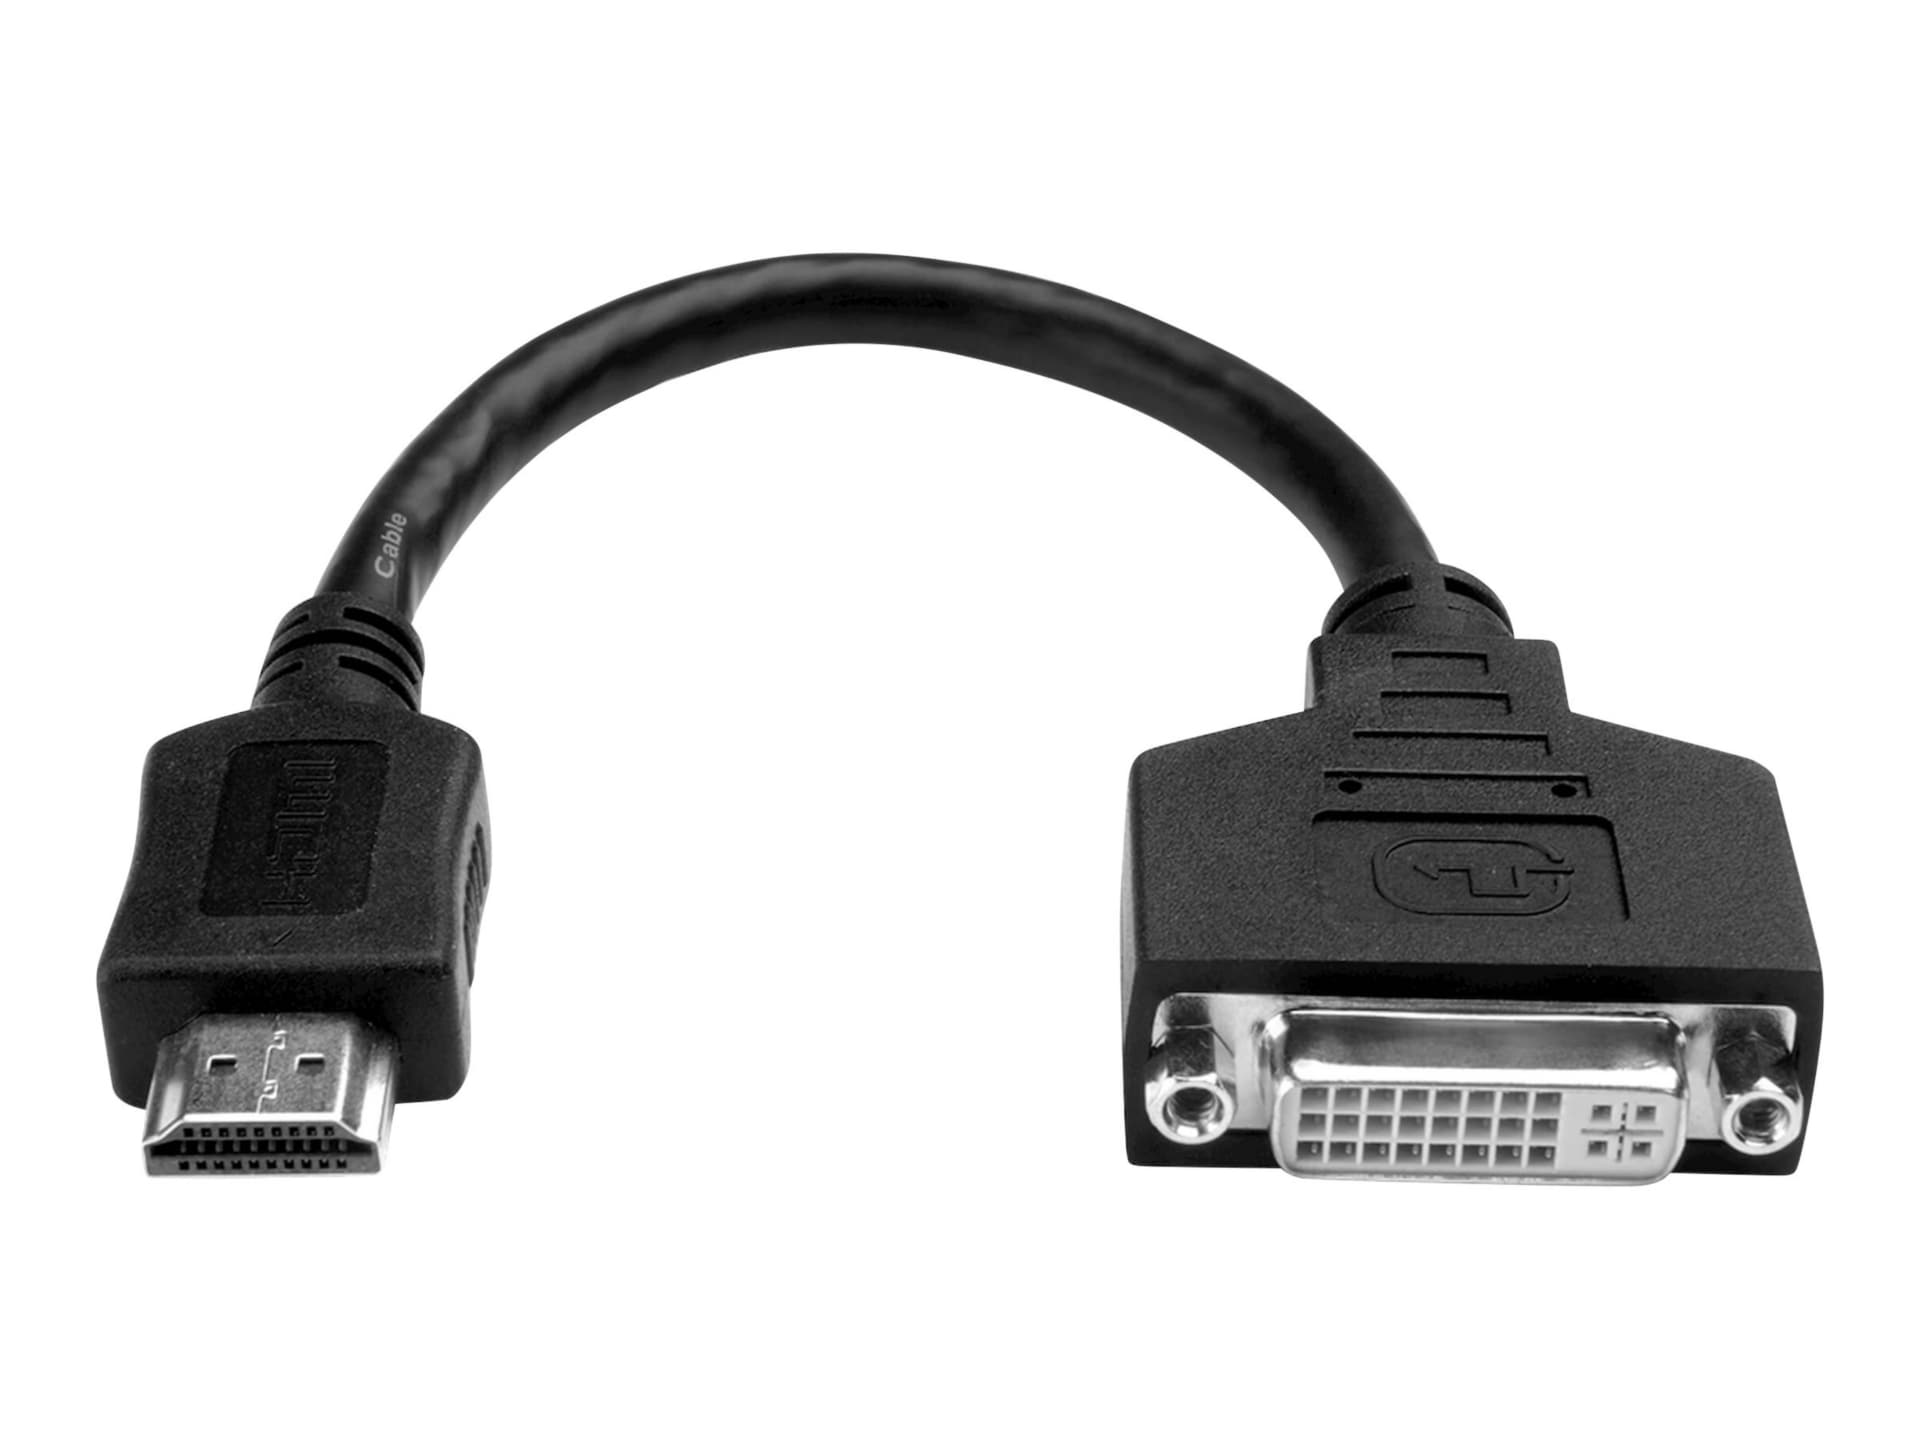 Synes godt om Omgivelser Sovereign Tripp Lite 8in HDMI to DVI Cable Adapter Converter HDMI Male to DVI-D  Female 8" - adapter - 8 in - P132-08N - Audio & Video Cables - CDW.com